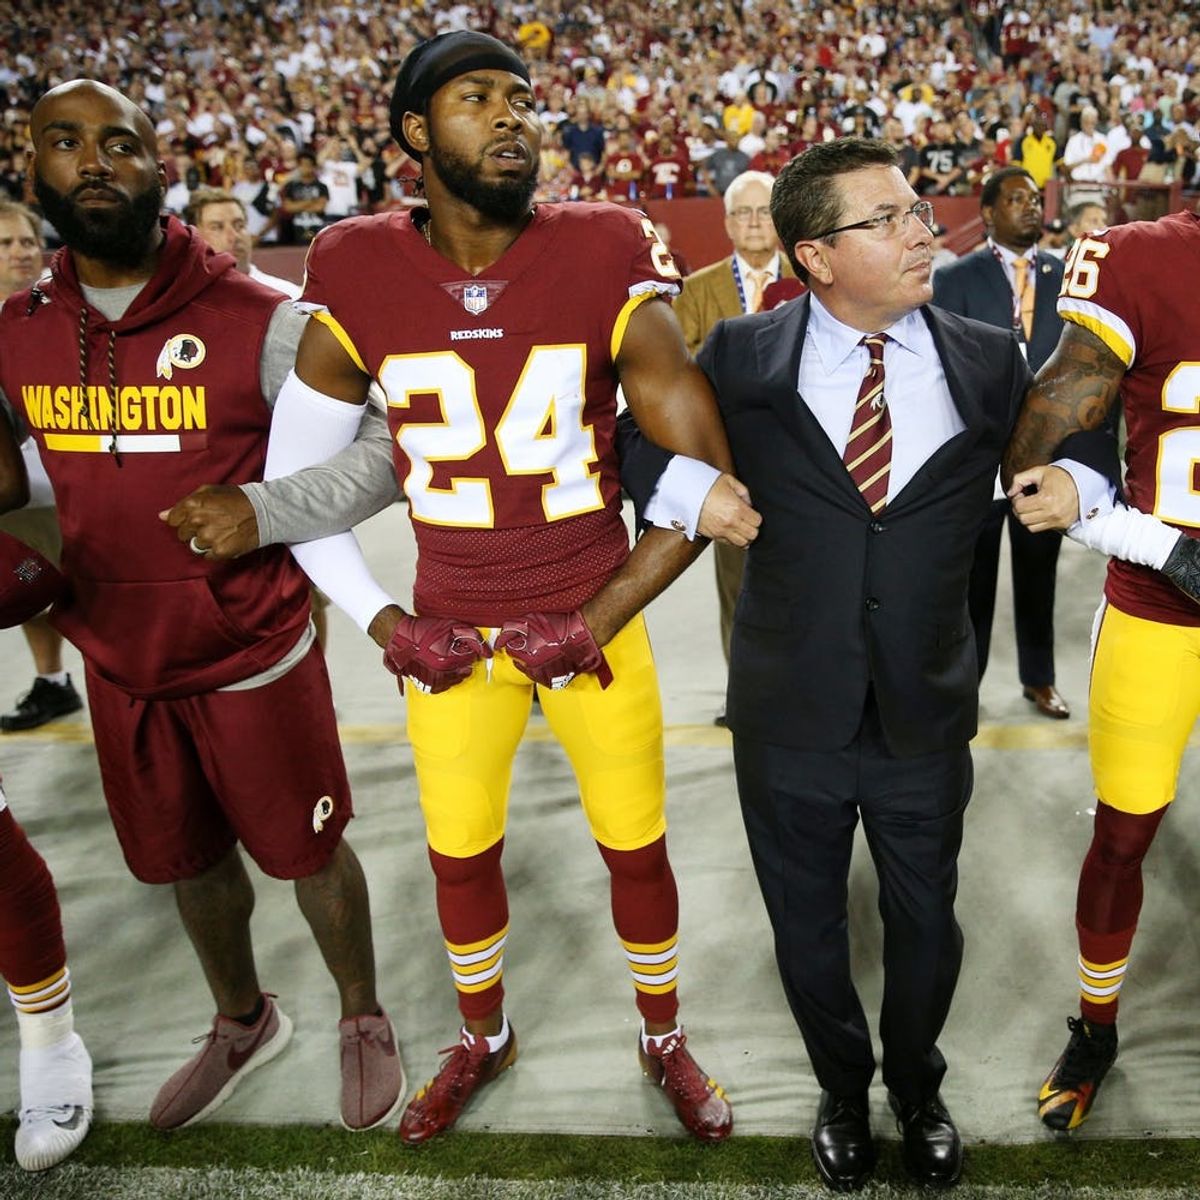 NFL Players and Team Owners Have United in Peaceful Protest Against Police Brutality